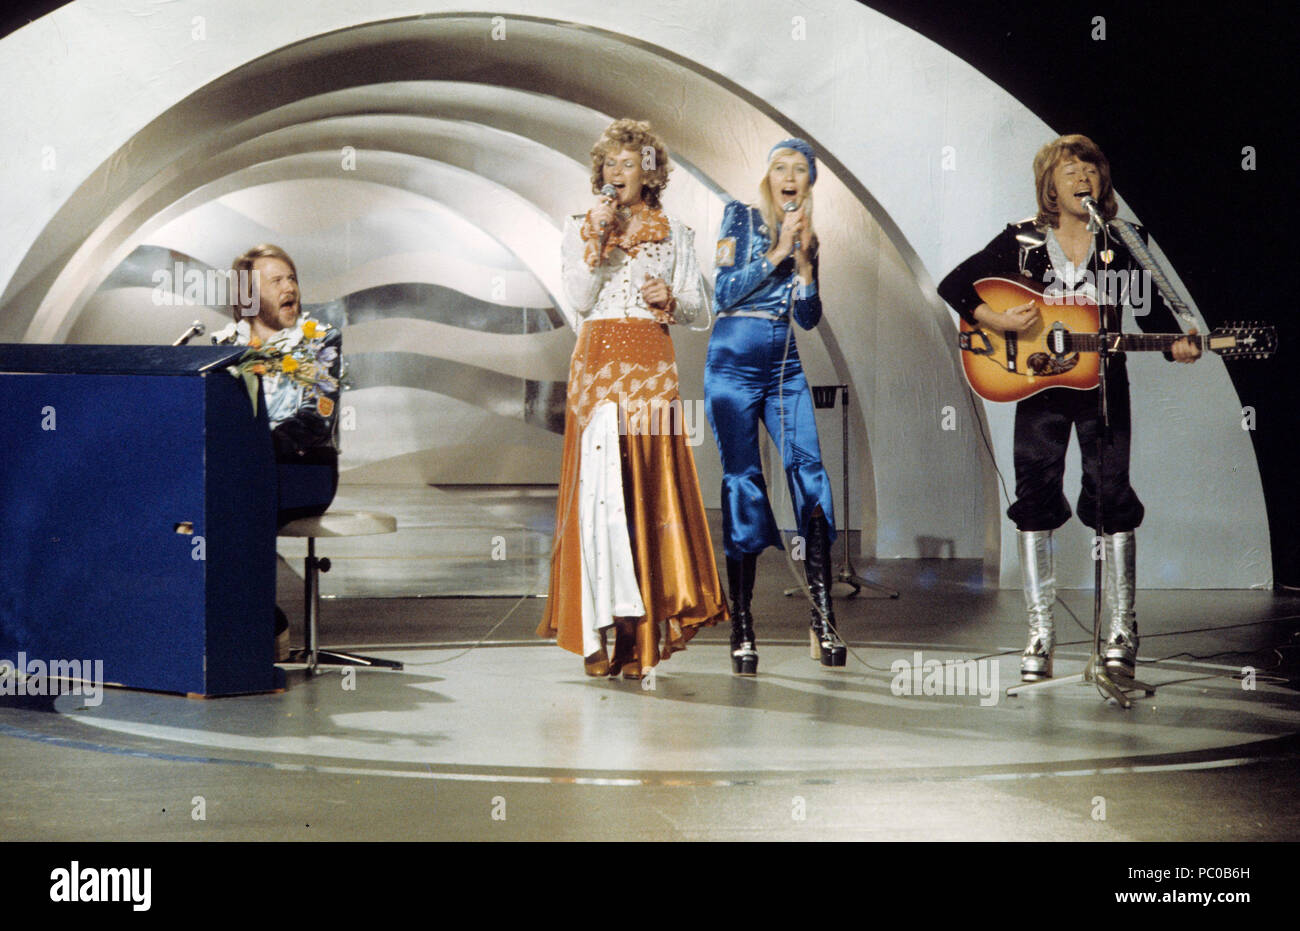 ABBA. Anni-Frid Lyngstad, Benny Andersson, Agnetha Fältskog and Björn  Ulvaeus performing the song Waterloo in the swedish competetion  Melodifestivalen on 9 February 1974. and won the Eurovision song contest  the same year